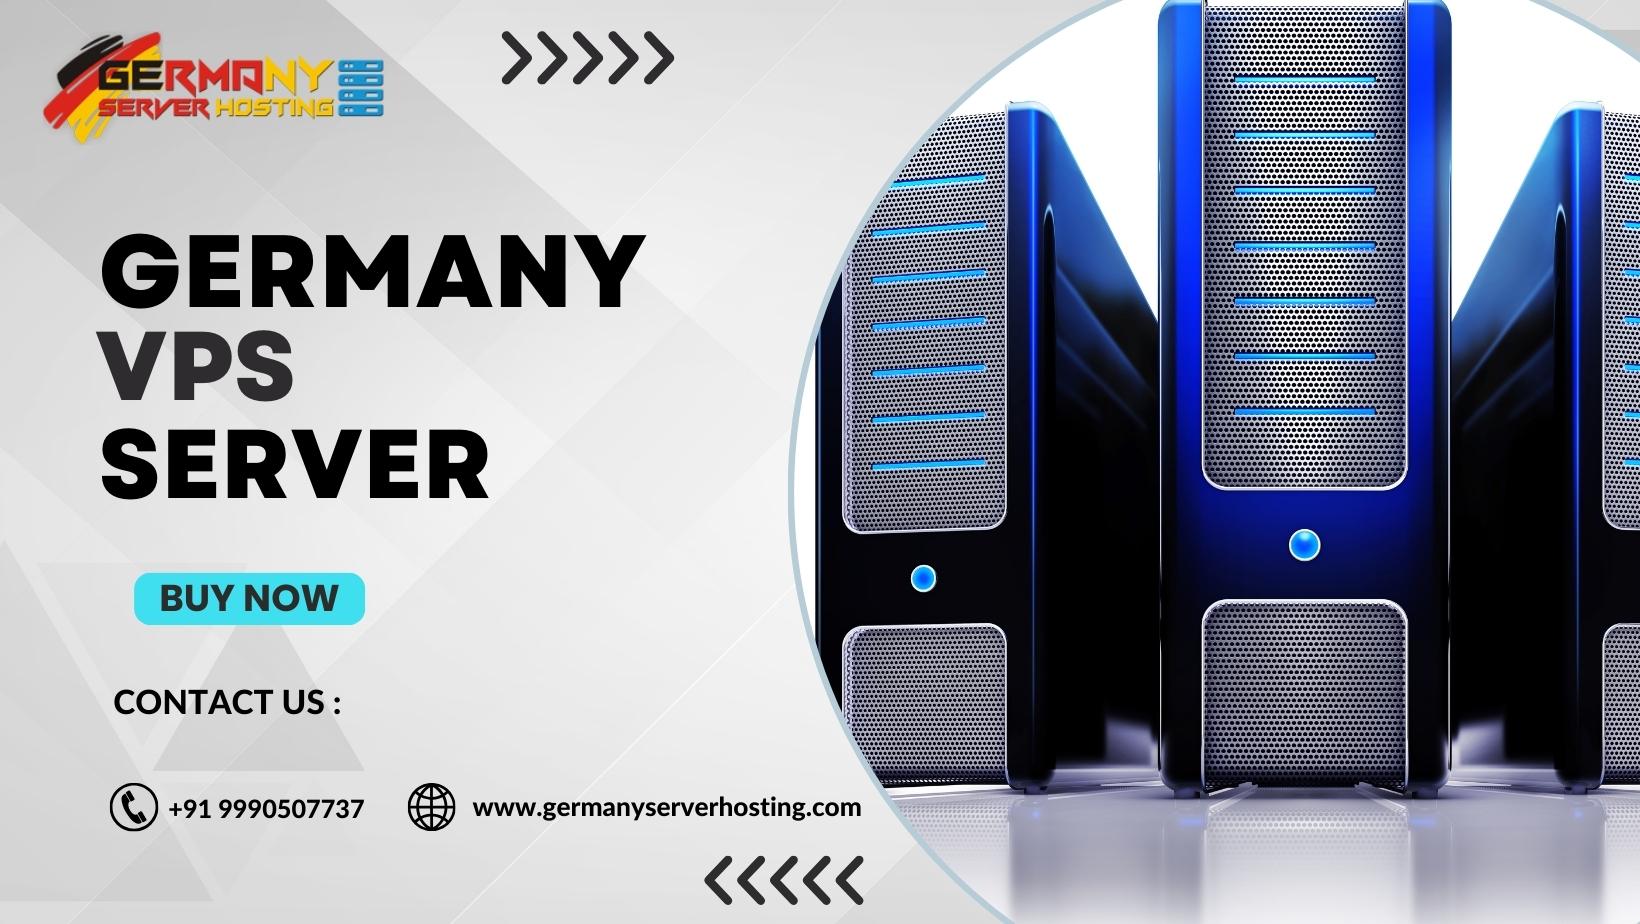 Germany VPS Server showcasing high-performance hosting in a secure and reliable environment.